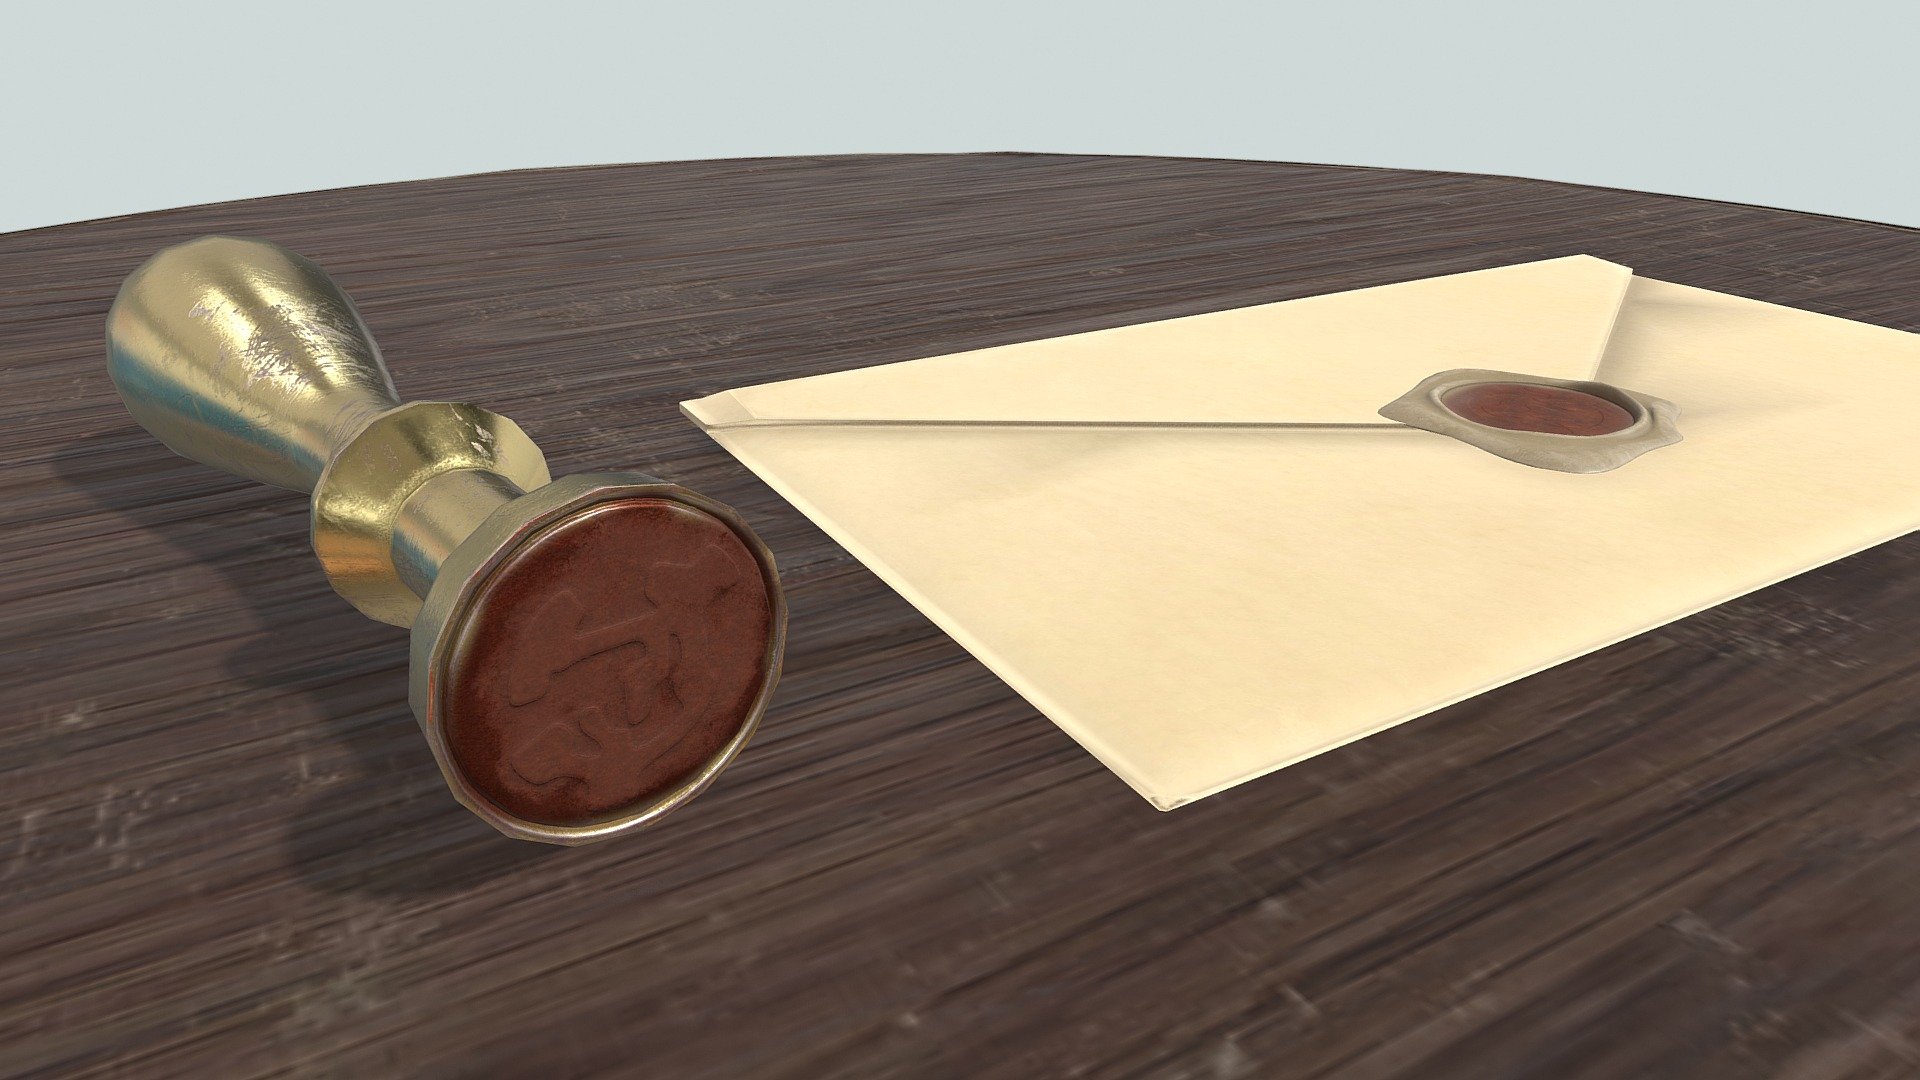 Seal and letter envelope. Sets of textures with resolution 2k (2048 pixels) are made for each item 3d model